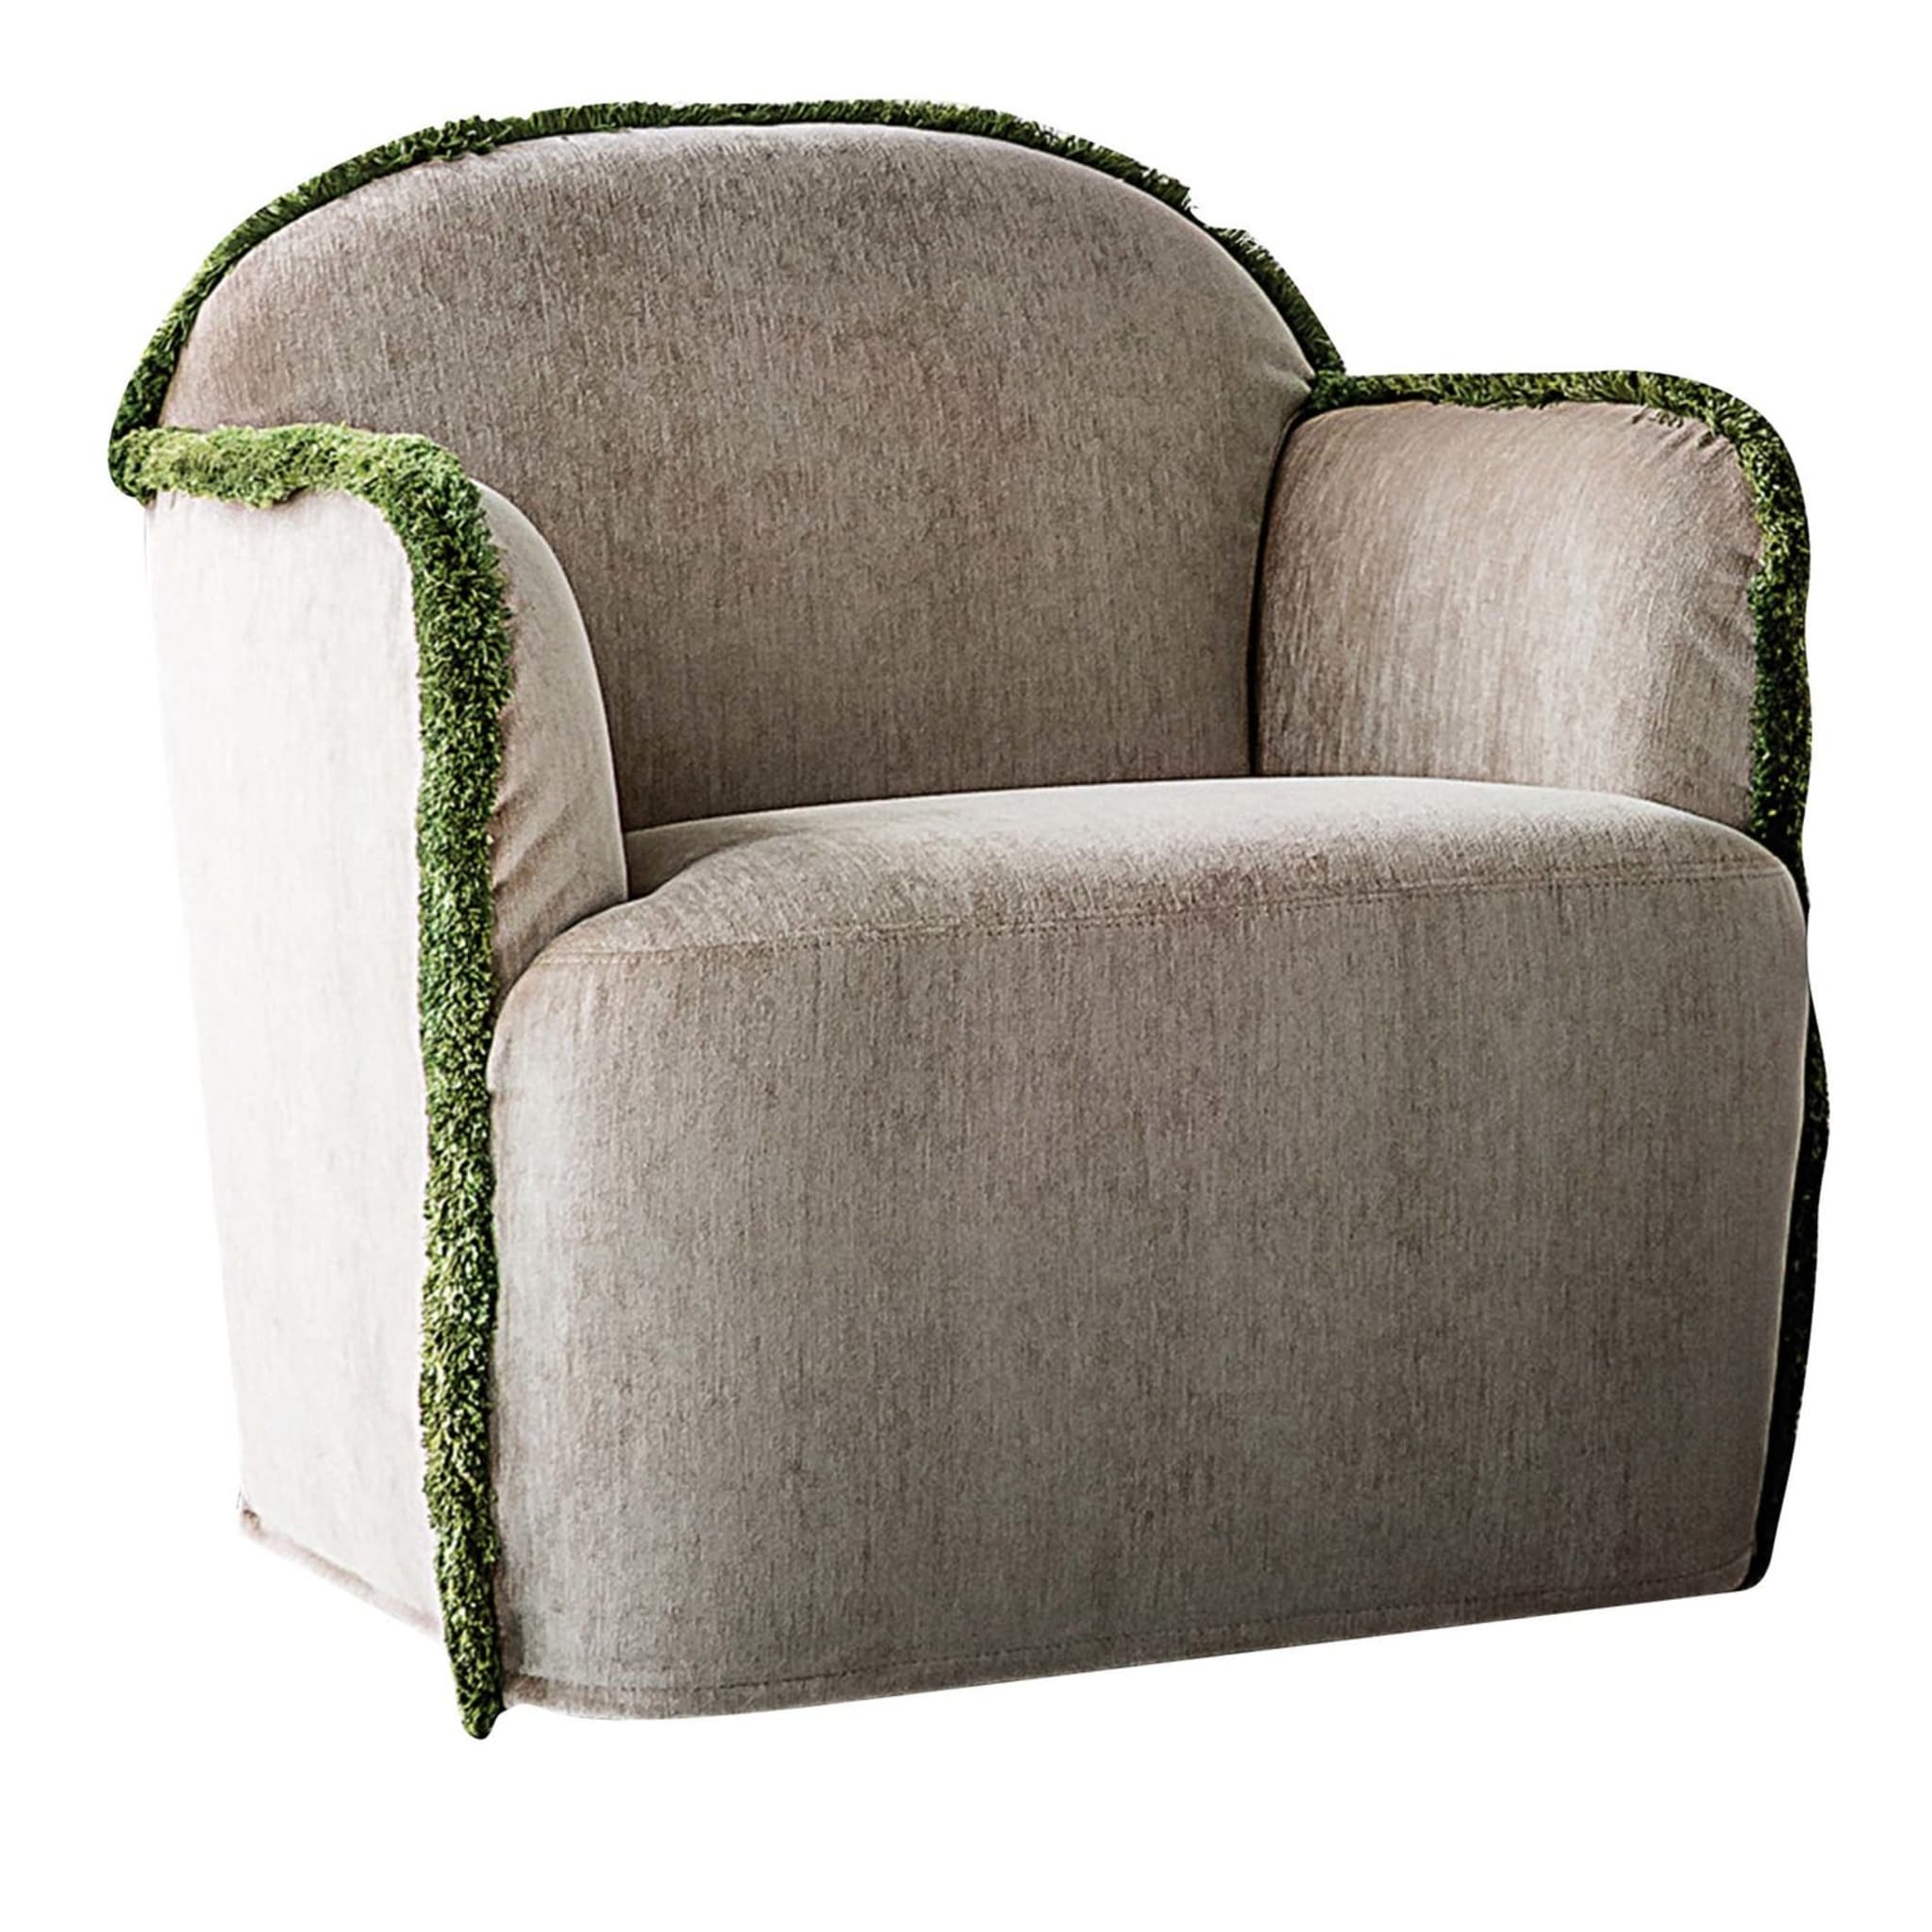 Ada Cream Armchair with Green Piping by Paola Navone - Main view